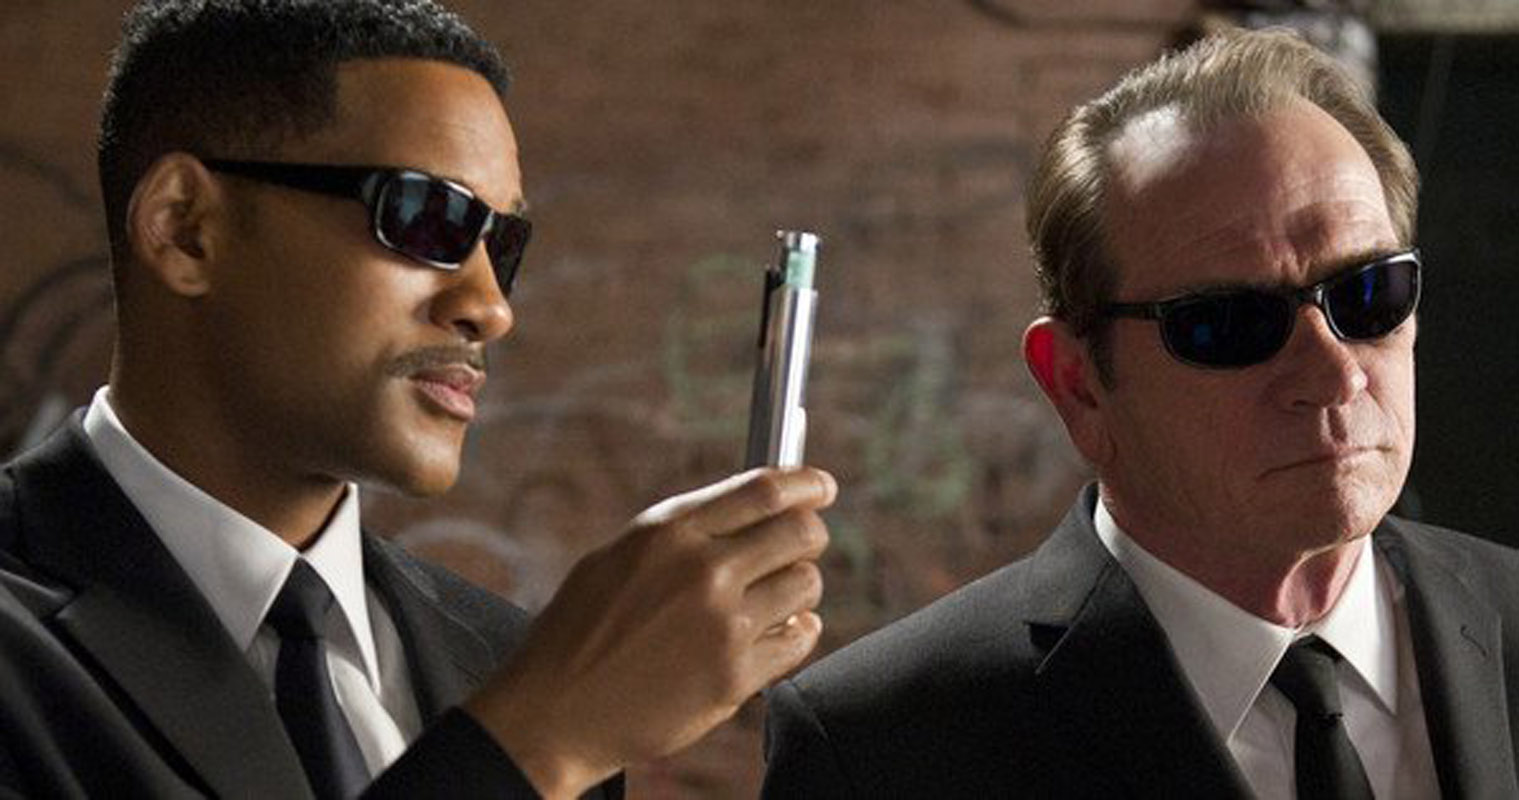 Men in Black agents J & K
with a Neuralyzer
to wipe your memory
